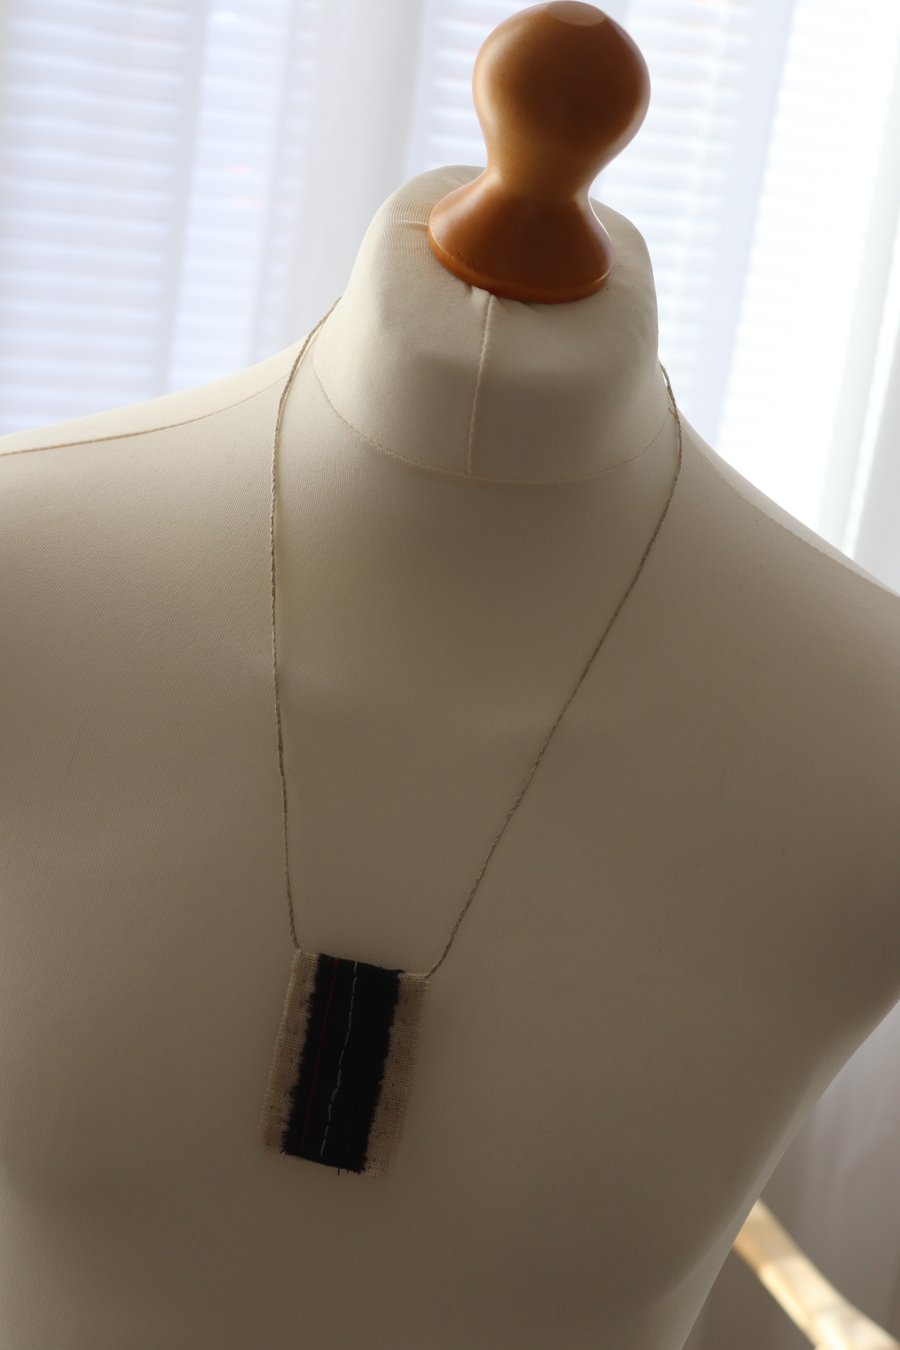 Hand cut and sewn Boro inspired necklace (EN28)